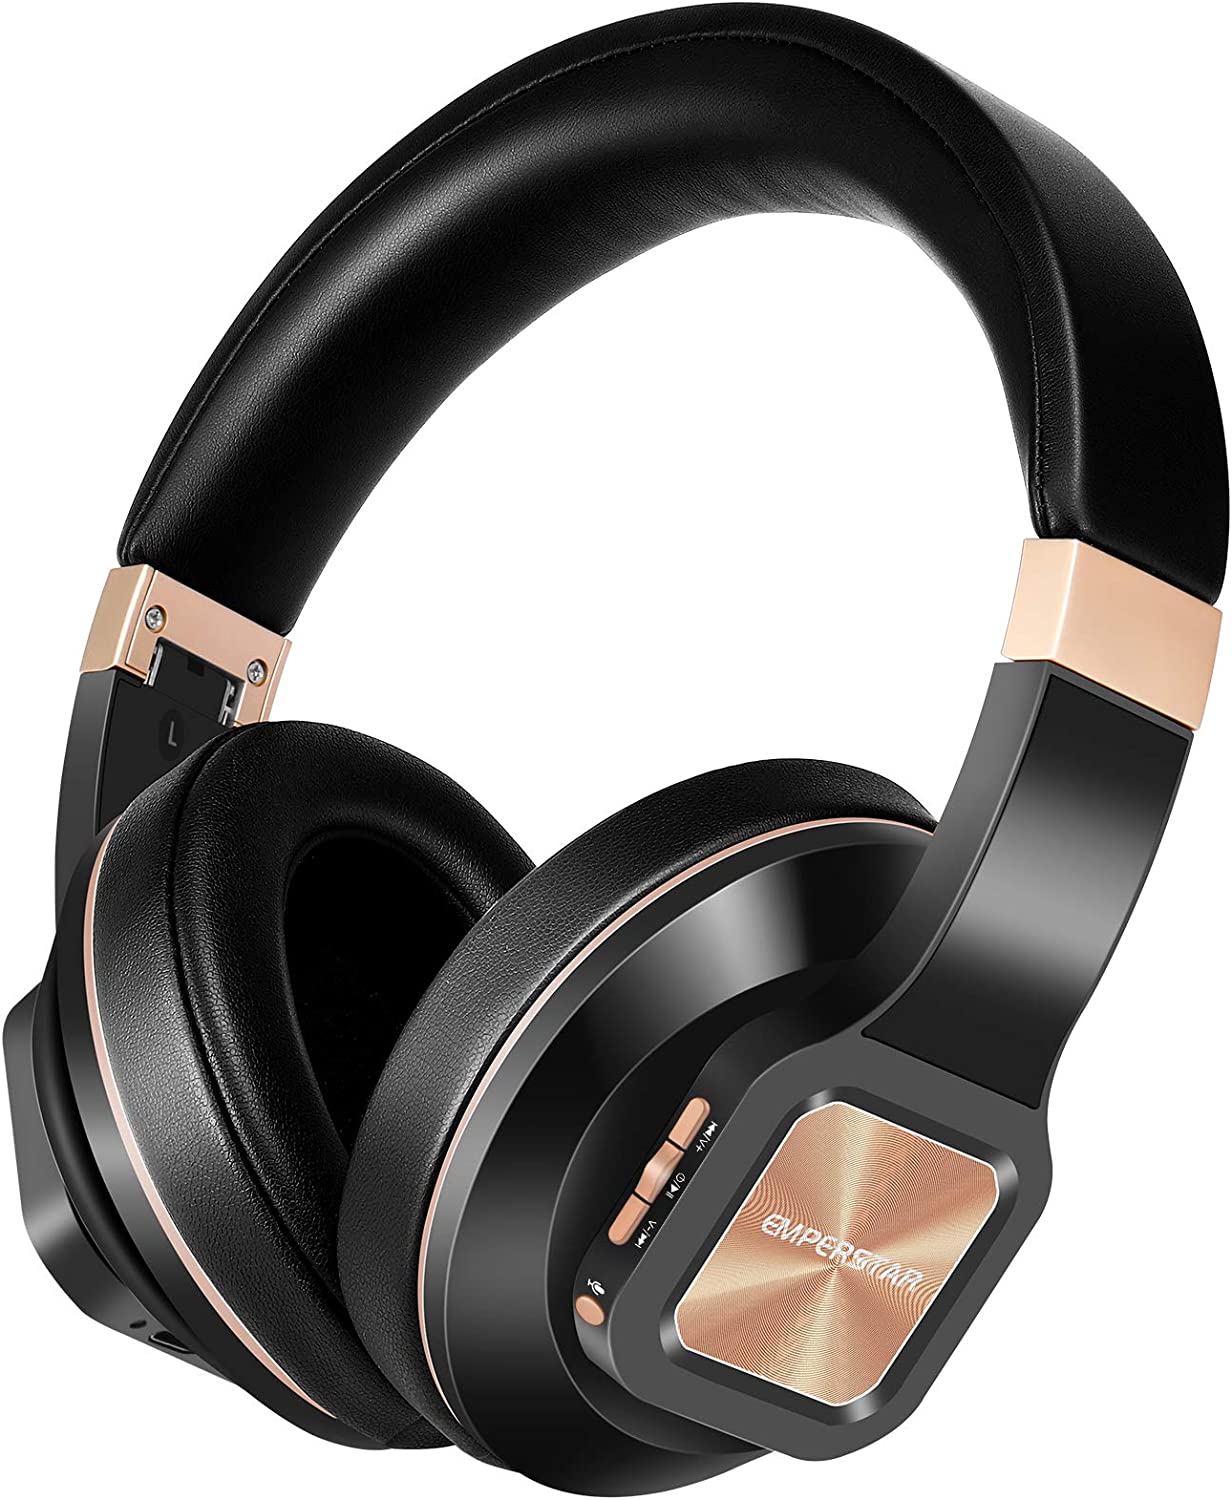 ''Noise Cancelling HEADPHONES, EMPERSTAR Over The Ear HEADPHONES Wireless Bluetooth Multipoint Comfor